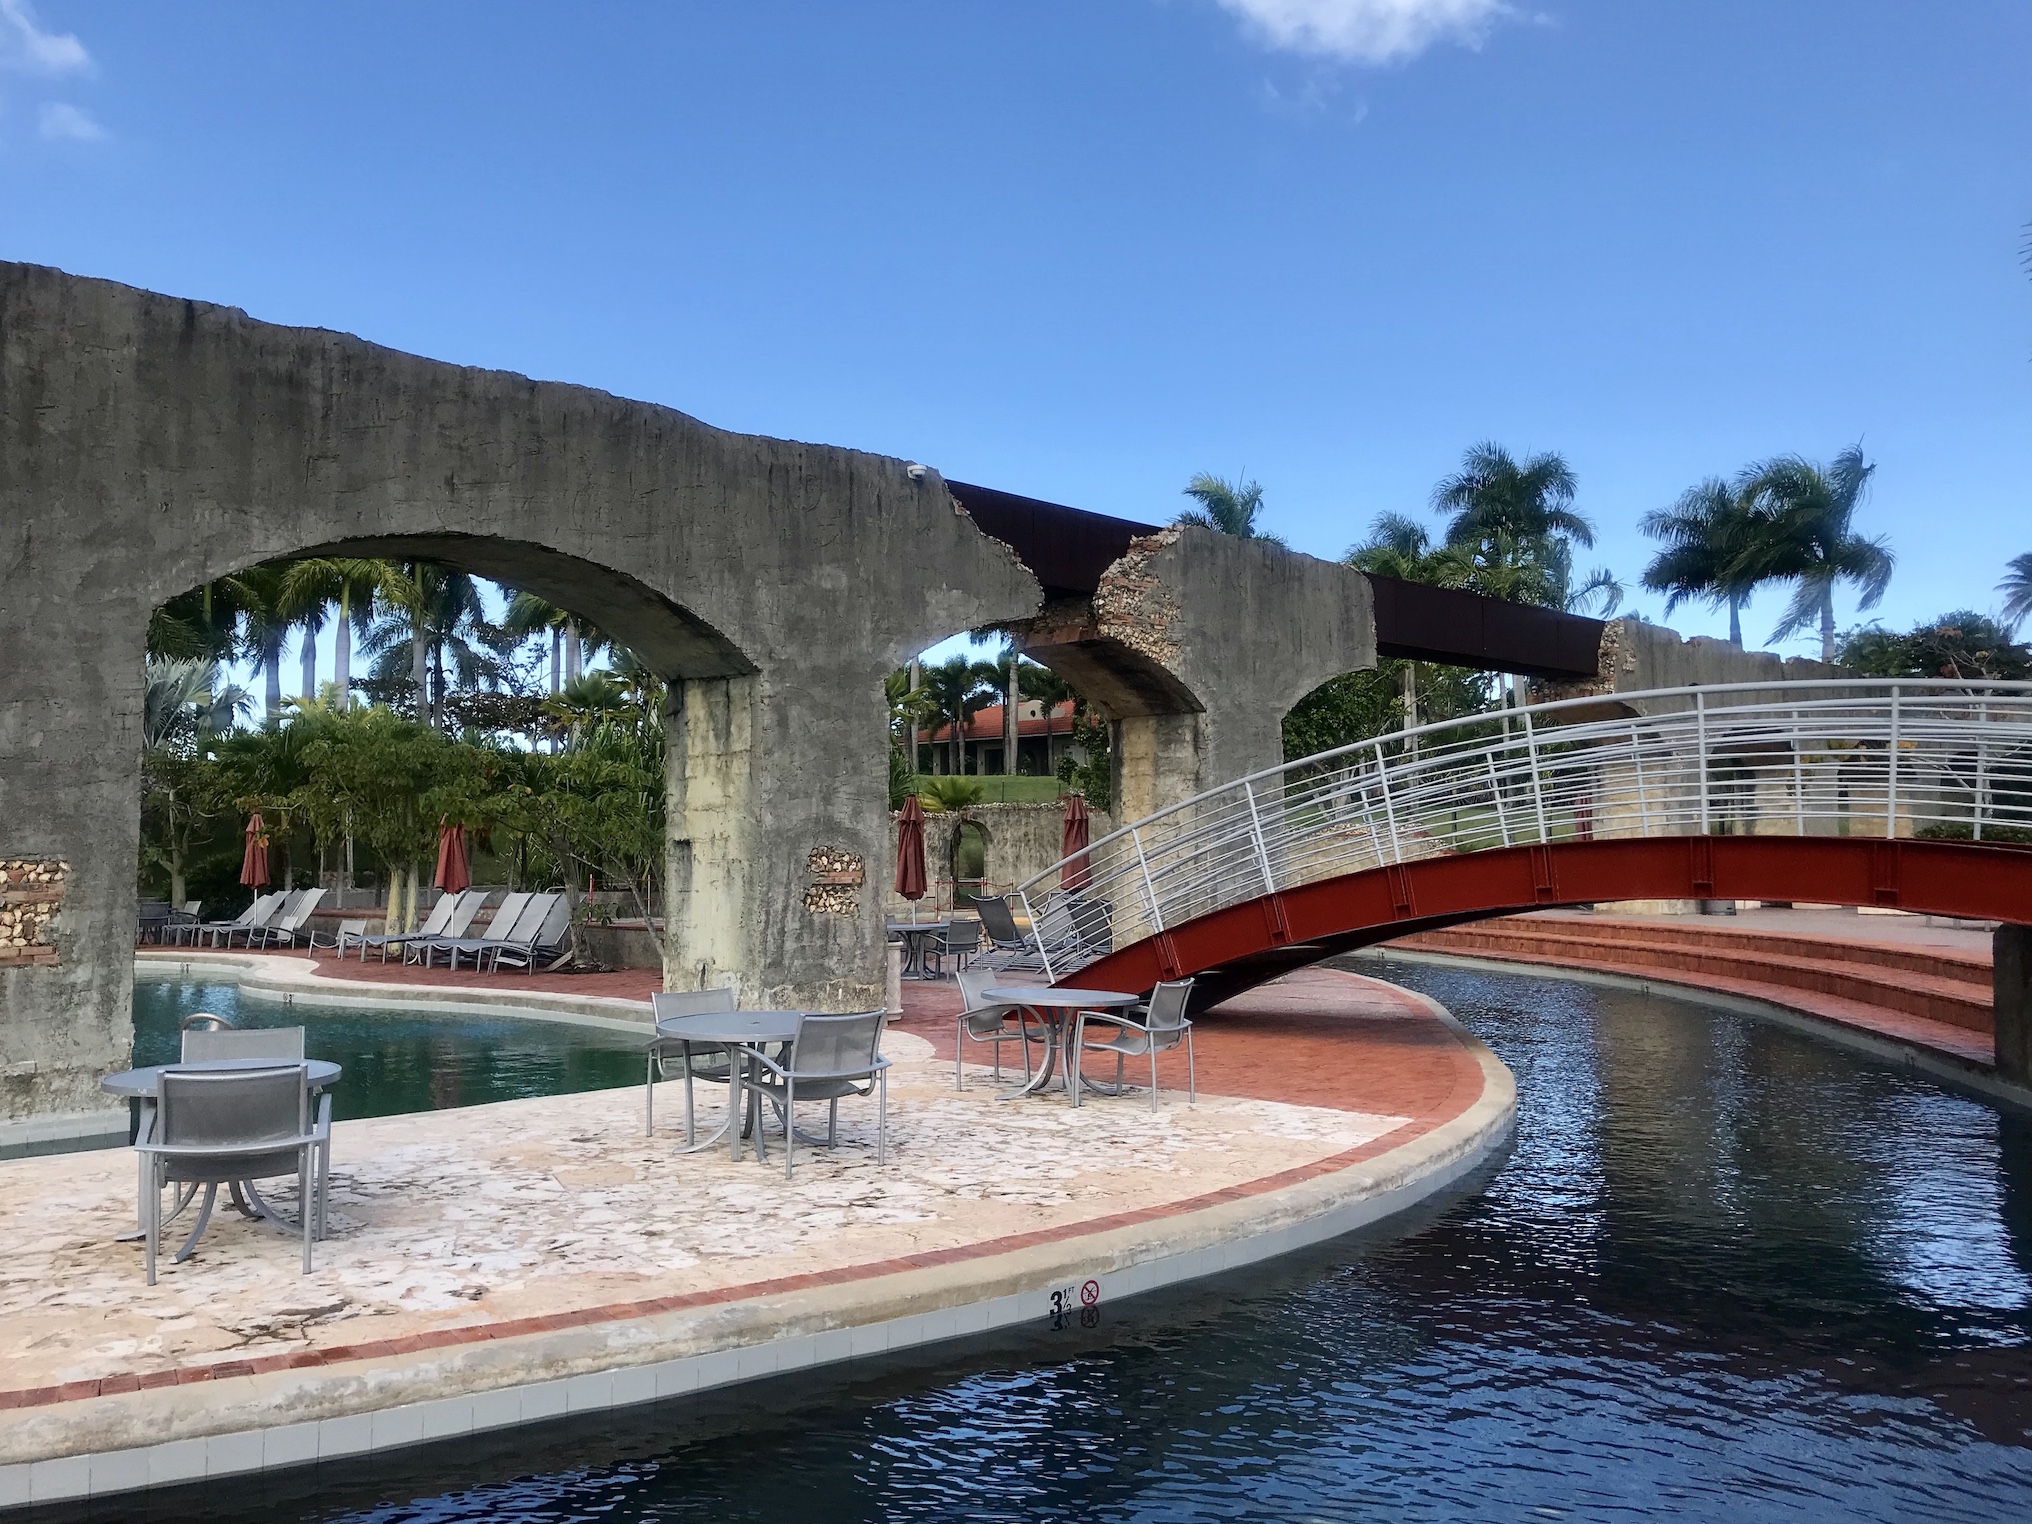 On-site water park – The Watermill (complimentary for hotel guests)